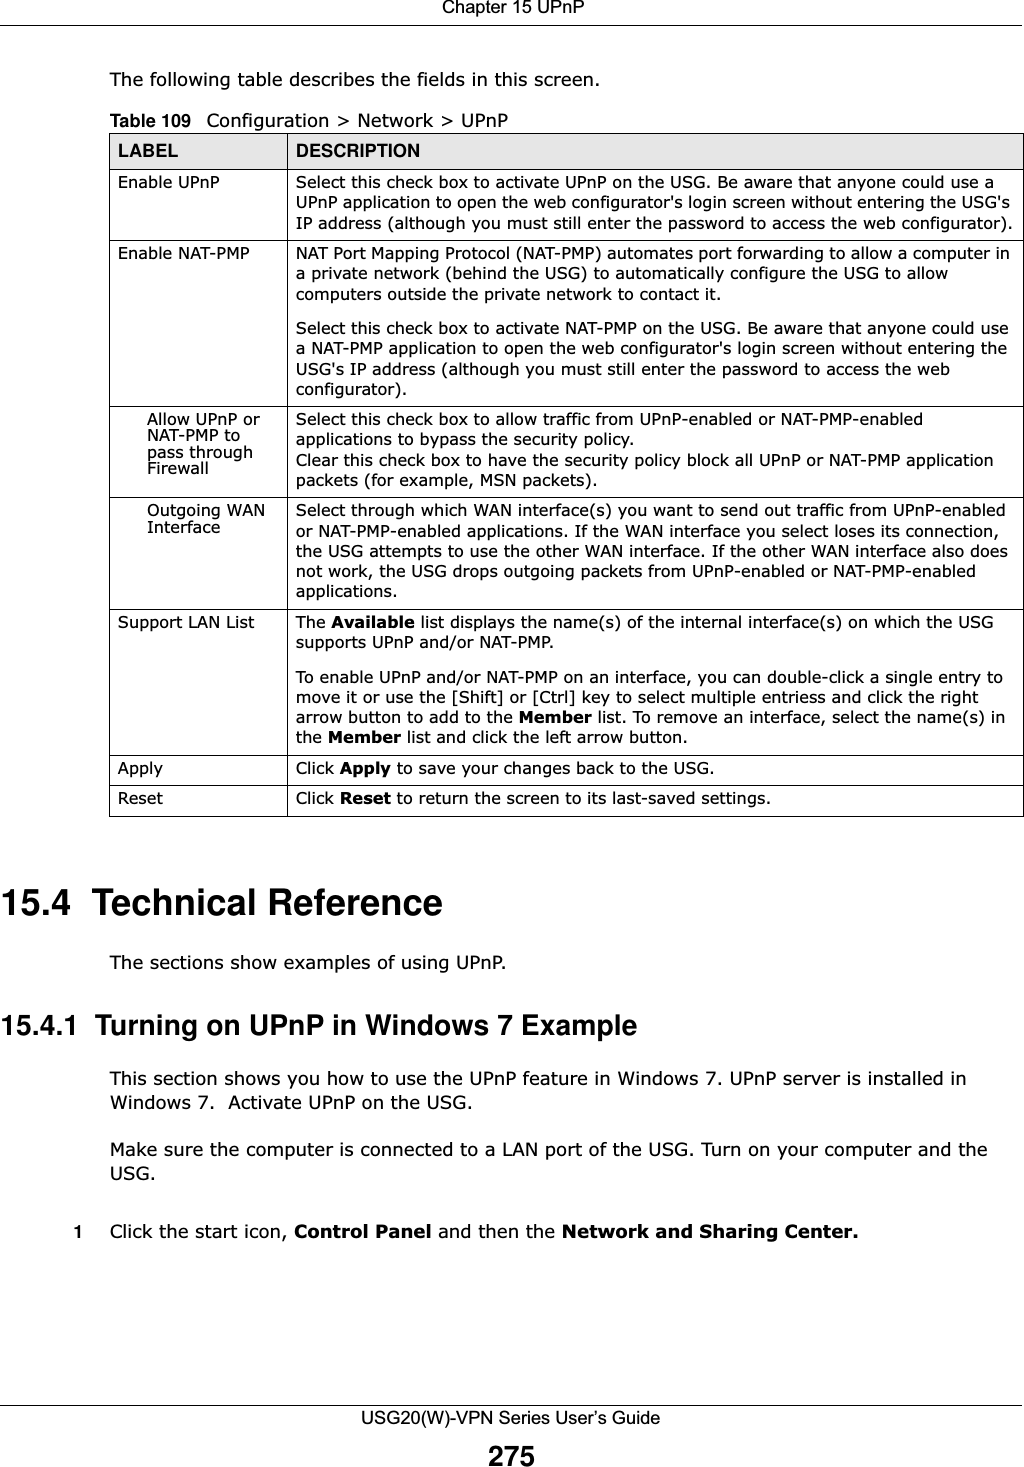  Chapter 15 UPnPUSG20(W)-VPN Series User’s Guide275The following table describes the fields in this screen.  15.4  Technical ReferenceThe sections show examples of using UPnP. 15.4.1  Turning on UPnP in Windows 7 ExampleThis section shows you how to use the UPnP feature in Windows 7. UPnP server is installed in Windows 7.  Activate UPnP on the USG.Make sure the computer is connected to a LAN port of the USG. Turn on your computer and the USG. 1Click the start icon, Control Panel and then the Network and Sharing Center.Table 109   Configuration &gt; Network &gt; UPnPLABEL DESCRIPTIONEnable UPnP  Select this check box to activate UPnP on the USG. Be aware that anyone could use a UPnP application to open the web configurator&apos;s login screen without entering the USG&apos;s IP address (although you must still enter the password to access the web configurator).Enable NAT-PMP NAT Port Mapping Protocol (NAT-PMP) automates port forwarding to allow a computer in a private network (behind the USG) to automatically configure the USG to allow computers outside the private network to contact it.Select this check box to activate NAT-PMP on the USG. Be aware that anyone could use a NAT-PMP application to open the web configurator&apos;s login screen without entering the USG&apos;s IP address (although you must still enter the password to access the web configurator).Allow UPnP or NAT-PMP to pass through FirewallSelect this check box to allow traffic from UPnP-enabled or NAT-PMP-enabled applications to bypass the security policy. Clear this check box to have the security policy block all UPnP or NAT-PMP application packets (for example, MSN packets).Outgoing WAN Interface Select through which WAN interface(s) you want to send out traffic from UPnP-enabled or NAT-PMP-enabled applications. If the WAN interface you select loses its connection, the USG attempts to use the other WAN interface. If the other WAN interface also does not work, the USG drops outgoing packets from UPnP-enabled or NAT-PMP-enabled applications.Support LAN List The Available list displays the name(s) of the internal interface(s) on which the USG supports UPnP and/or NAT-PMP. To enable UPnP and/or NAT-PMP on an interface, you can double-click a single entry to move it or use the [Shift] or [Ctrl] key to select multiple entriess and click the right arrow button to add to the Member list. To remove an interface, select the name(s) in the Member list and click the left arrow button.Apply Click Apply to save your changes back to the USG.Reset Click Reset to return the screen to its last-saved settings. 